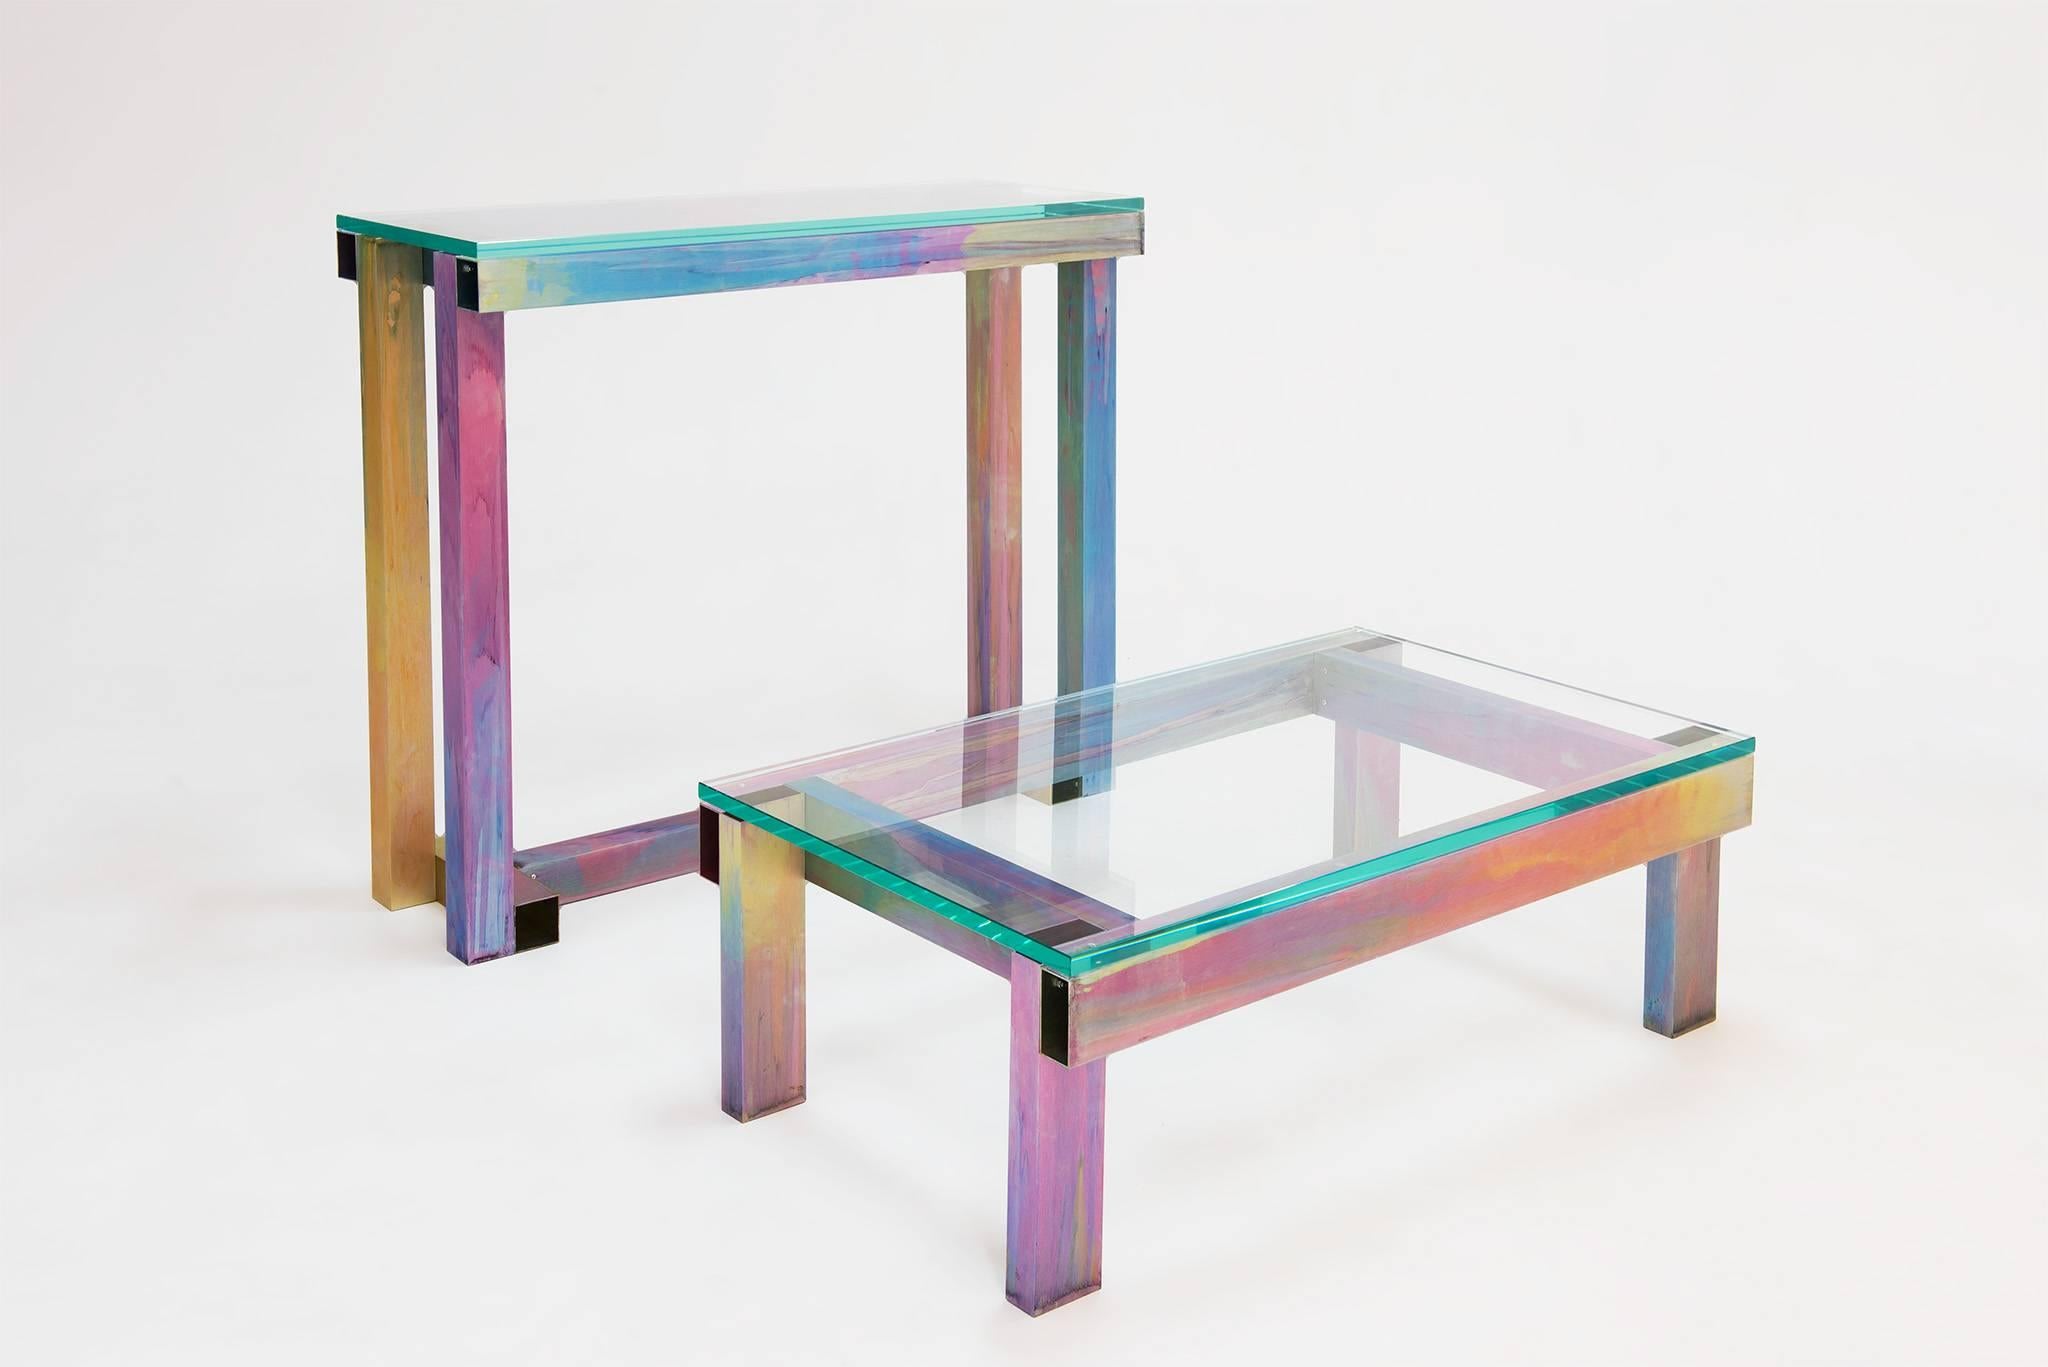 Fredrik Paulsen’s coffee table, commissioned by Etage Projects for Salon Art and Design New York 2017, turn the spotlight on a brand new and unique technique that combines anodized aluminium with his signature rainbow tie-dye we know from the Prism